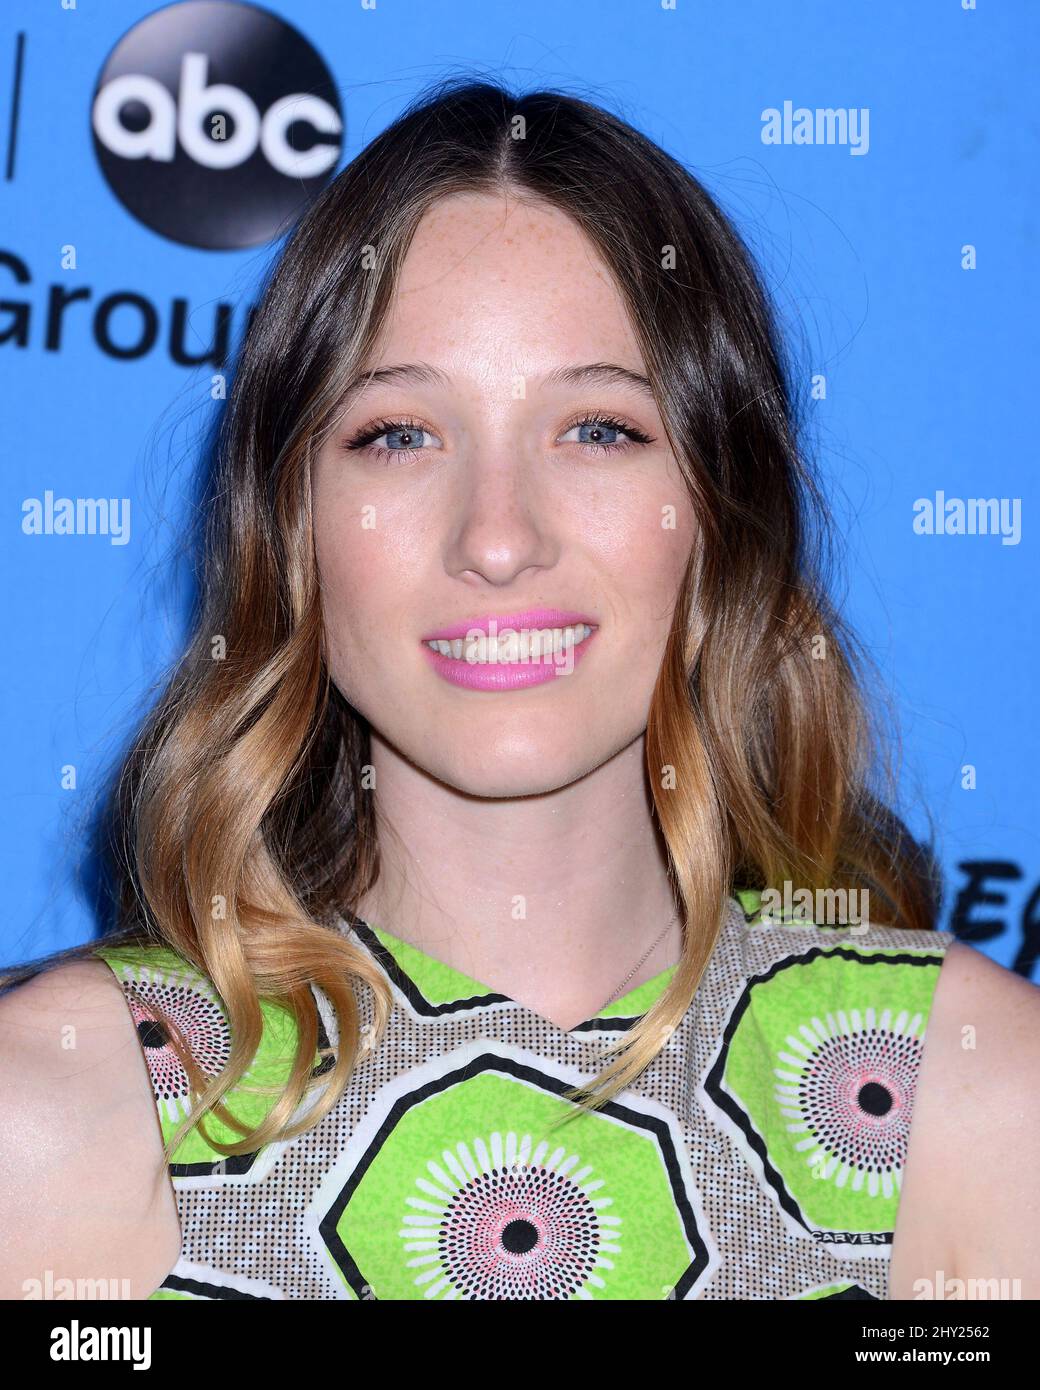 Sophie Lowe attends the ABC Summer TCA Press Tour held at the Beverly Hilton Hotel, Beverly Hills, California on August 4, 2013. Stock Photo